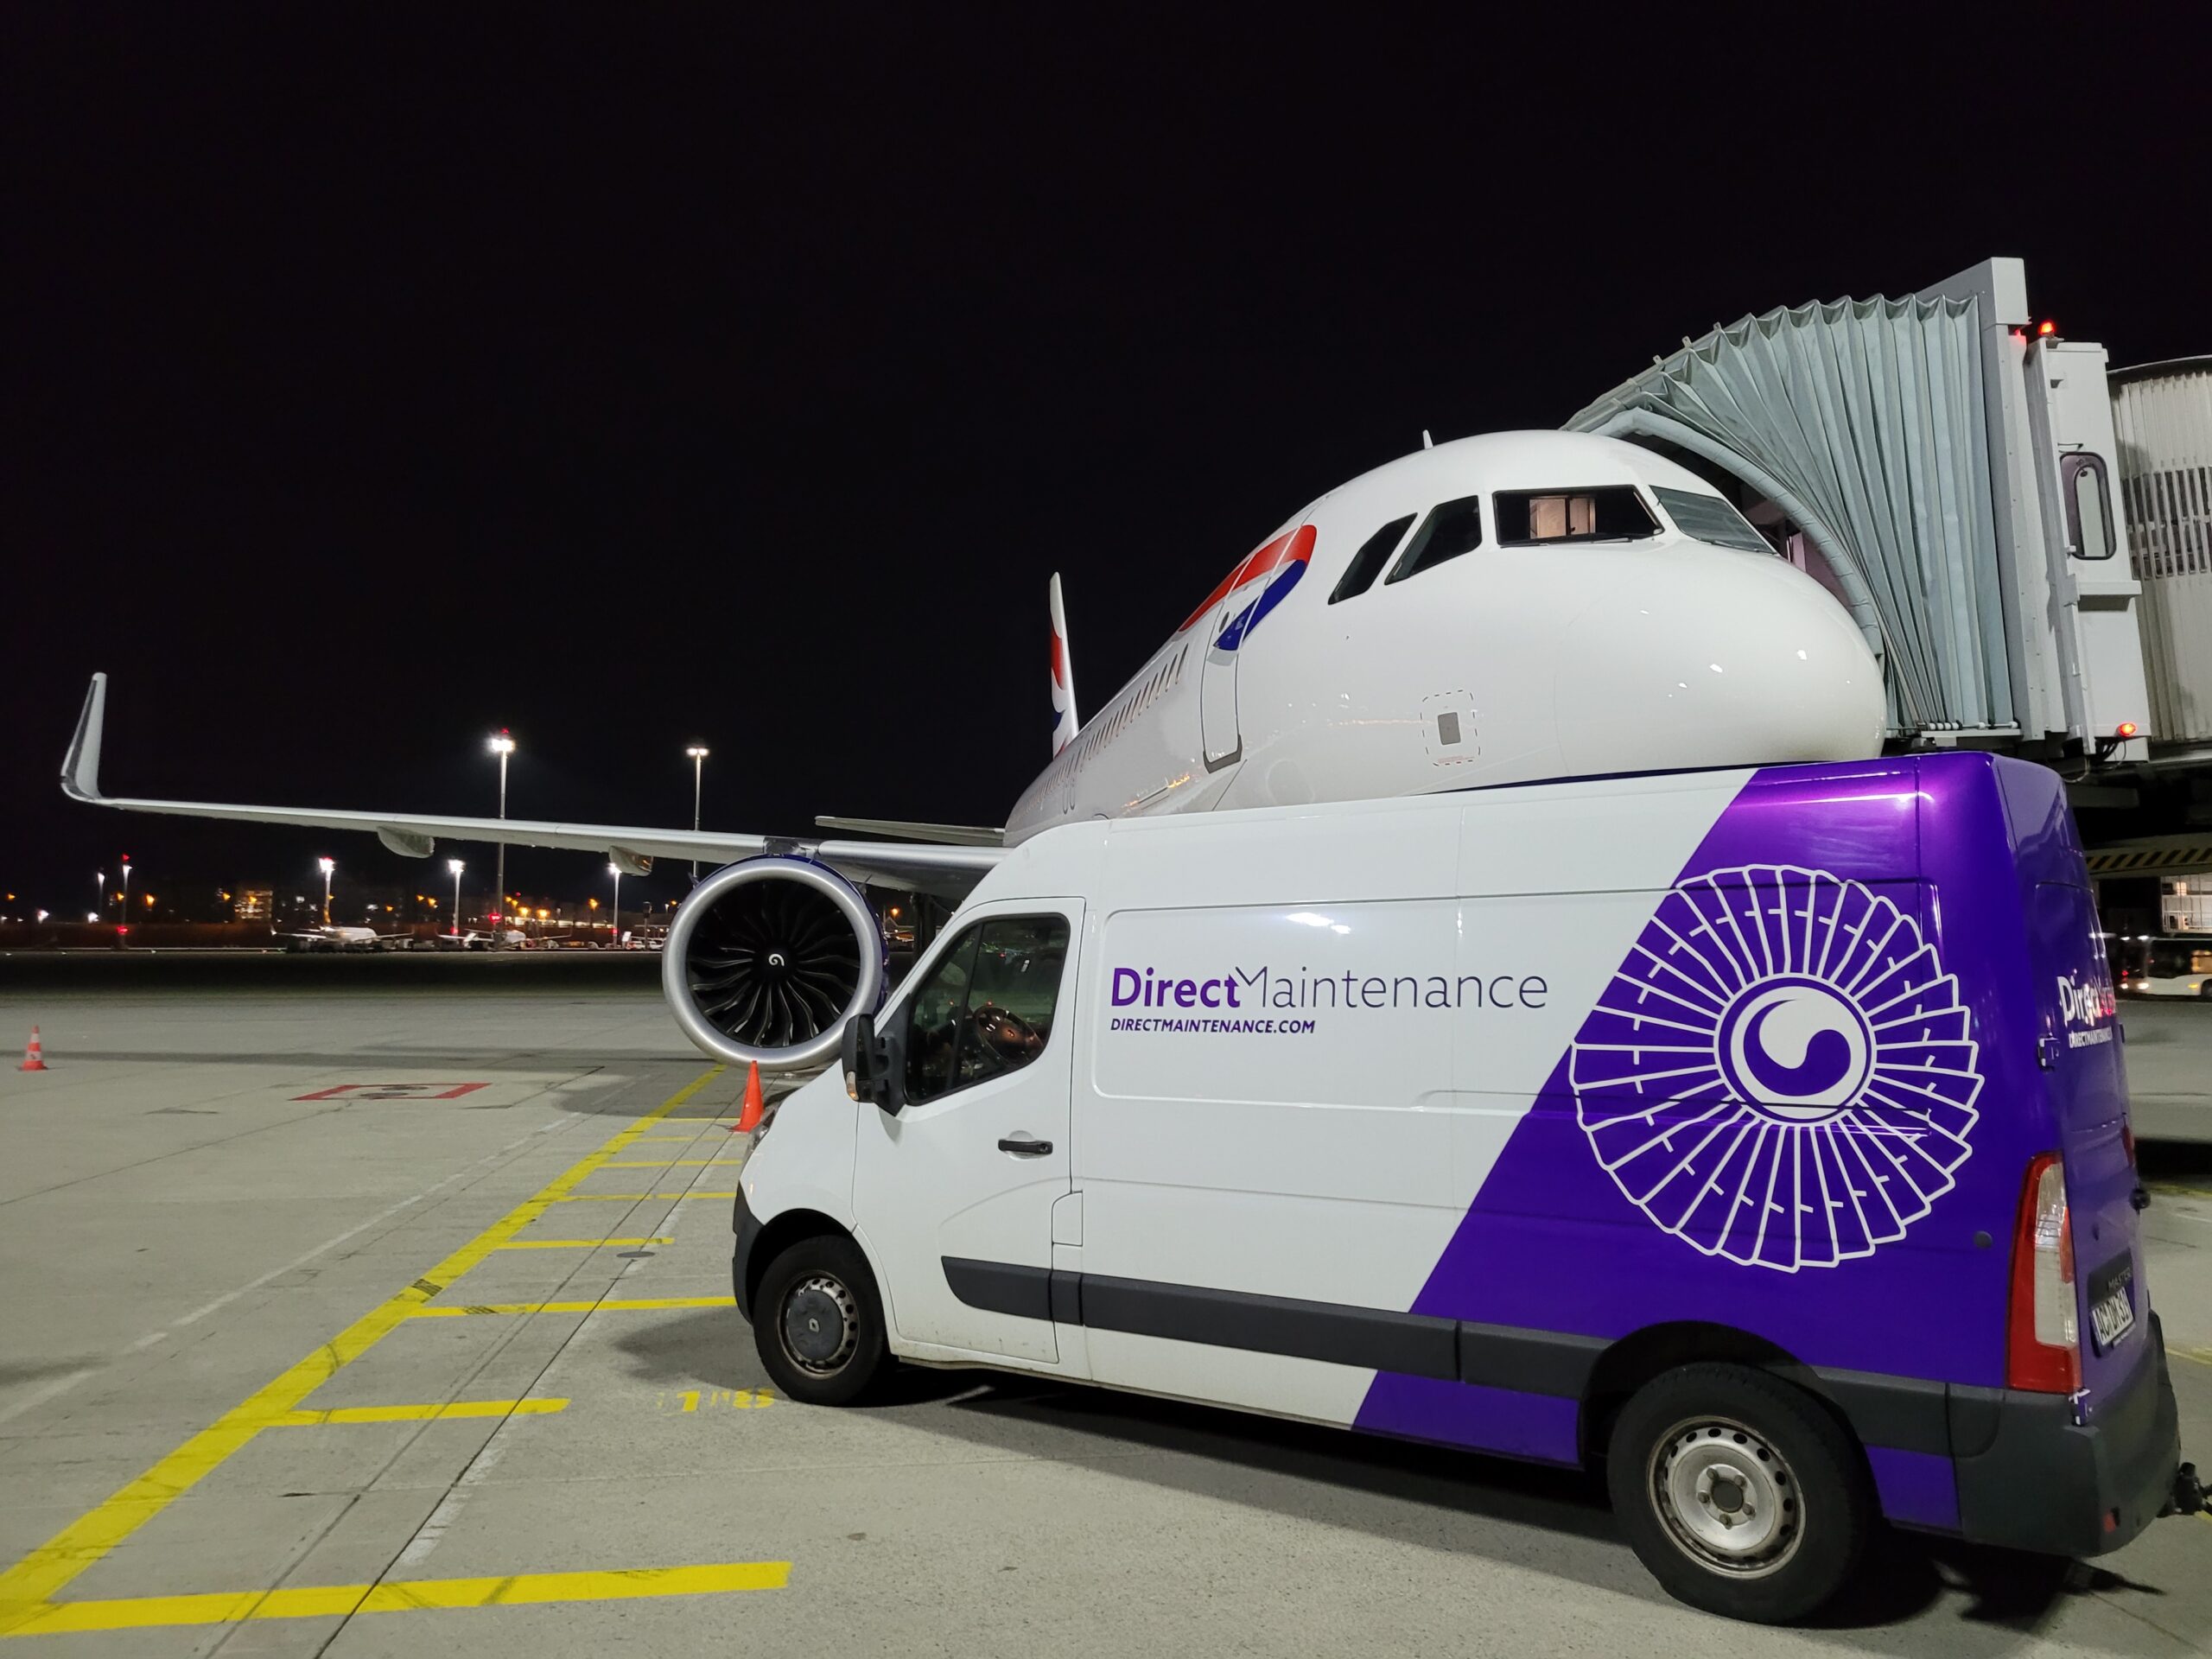 Direct Maintenance continues its expansion in Germany by opening new line maintenance station in Munich